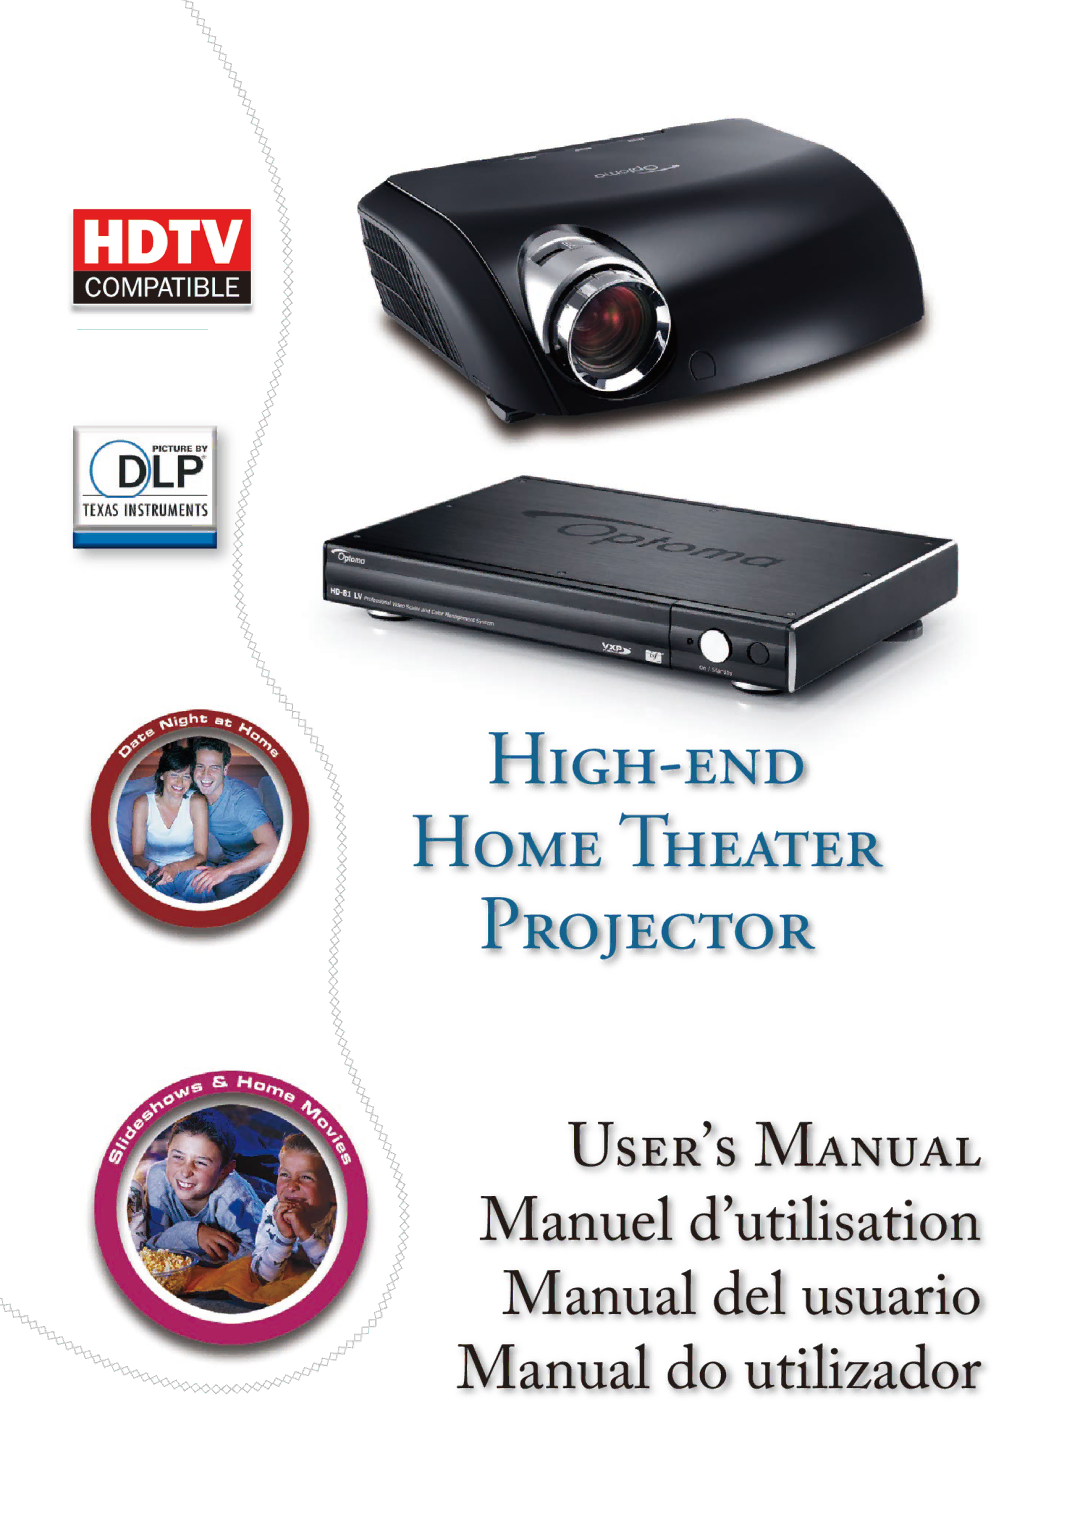 Optoma Technology Home Theatre Projector manuel dutilisation - 